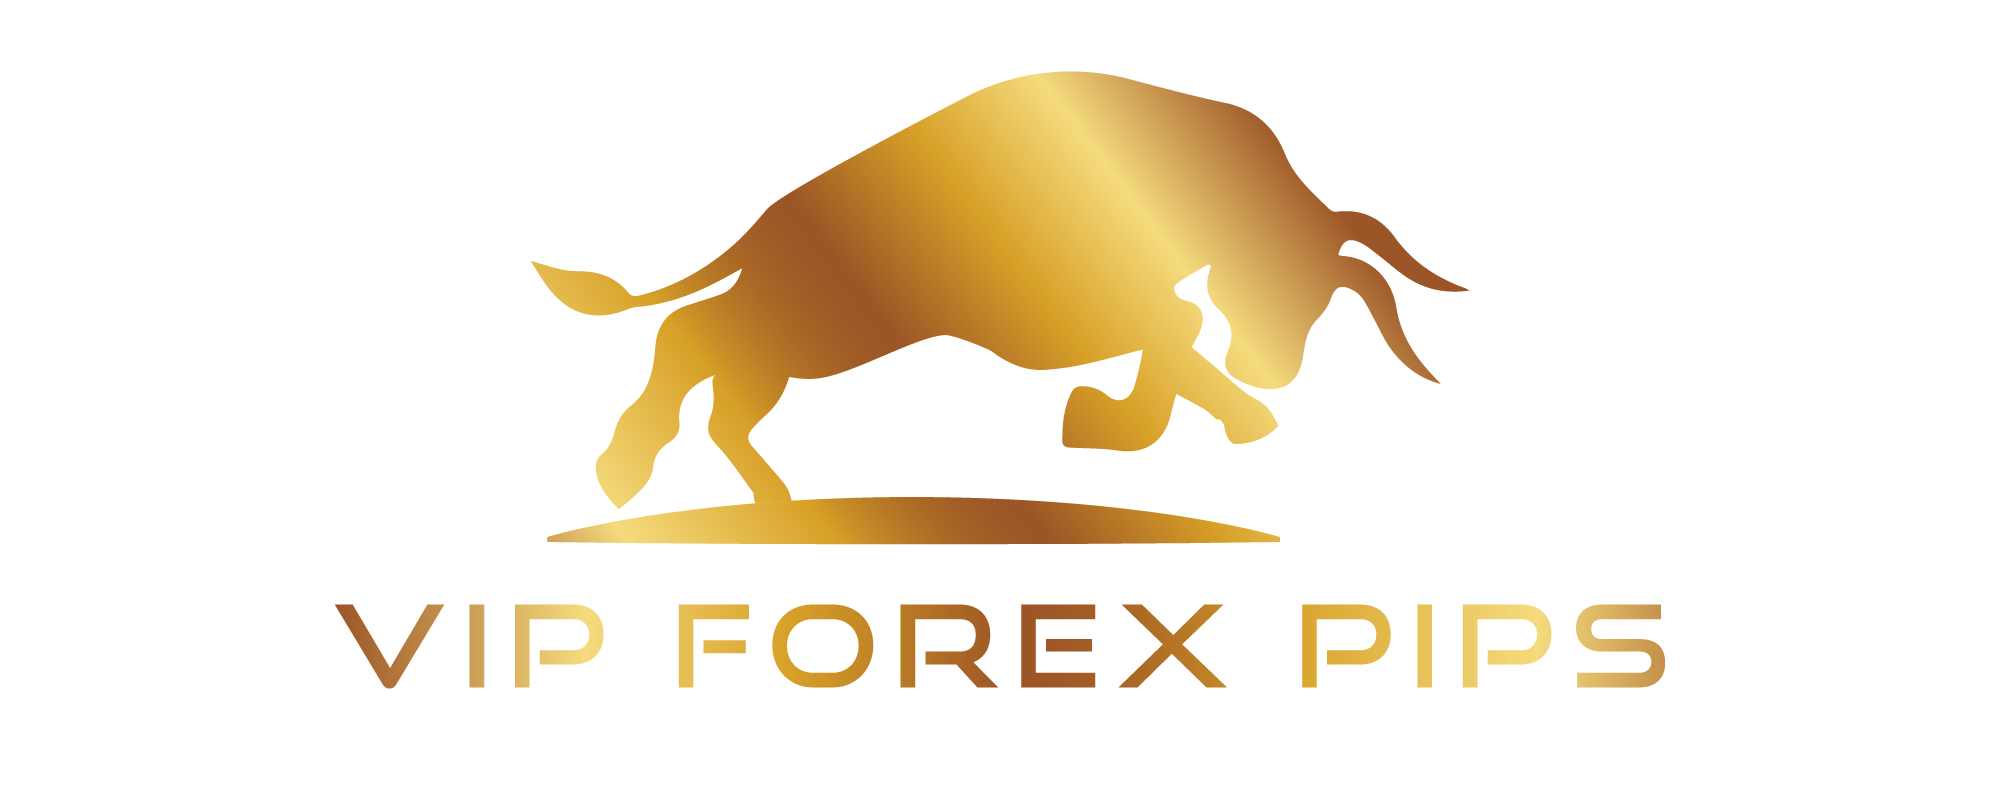 VIP FOREX PIPS